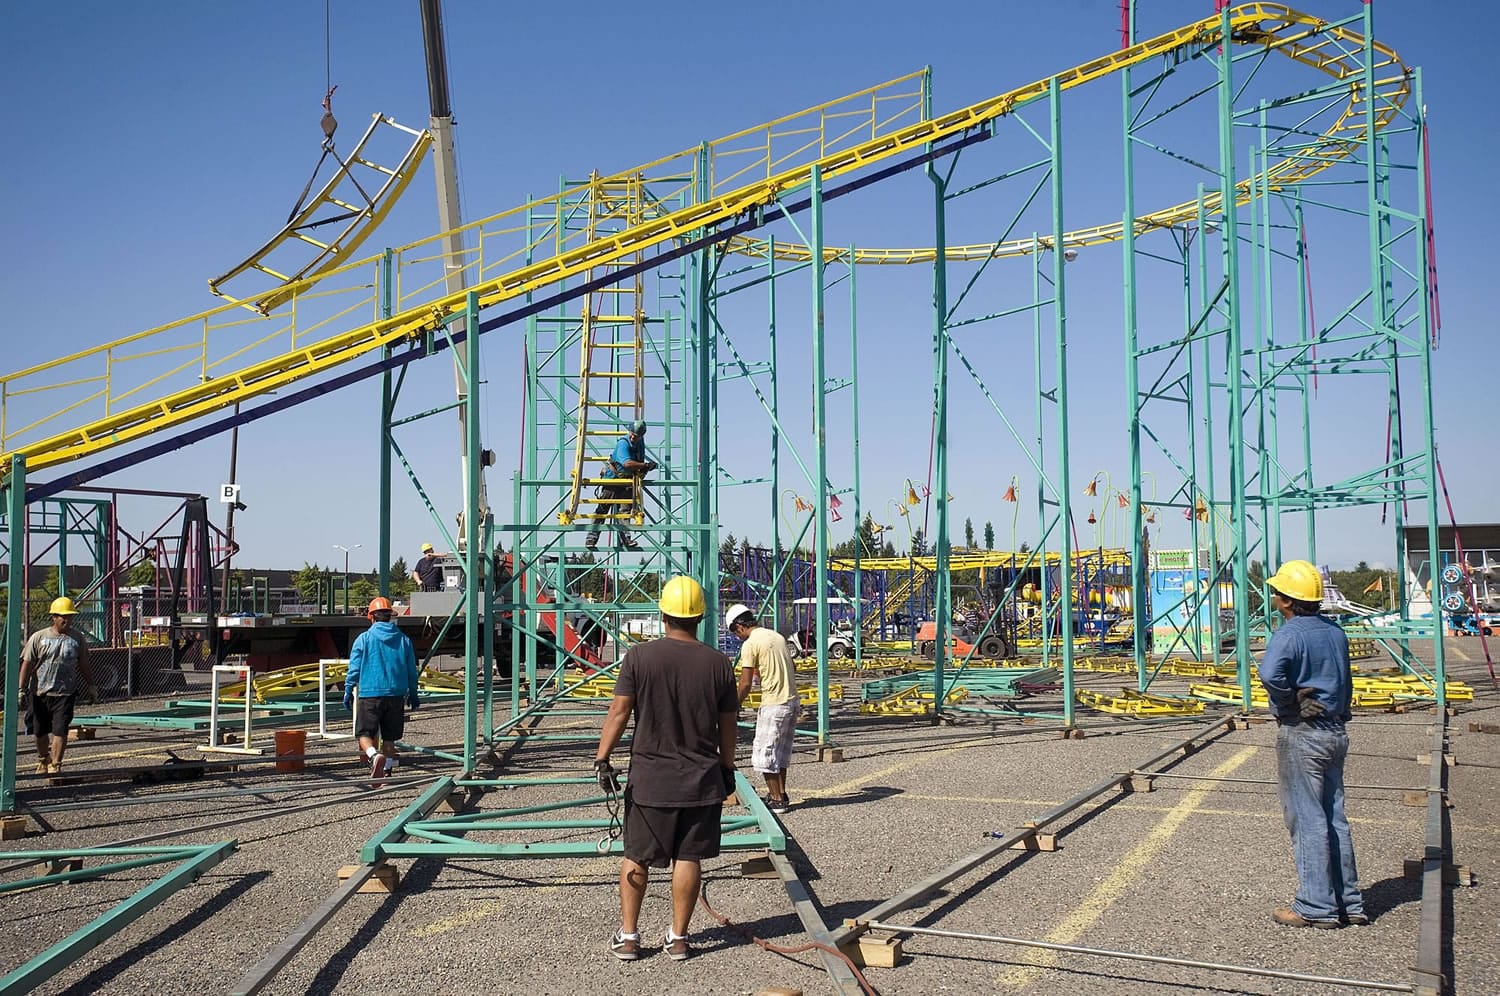 Workers assemble The Zillerator on Wednesday at the Clark County Fairgrounds, where the 10-day fair starts Friday and will likely draw more than 250,000 people.